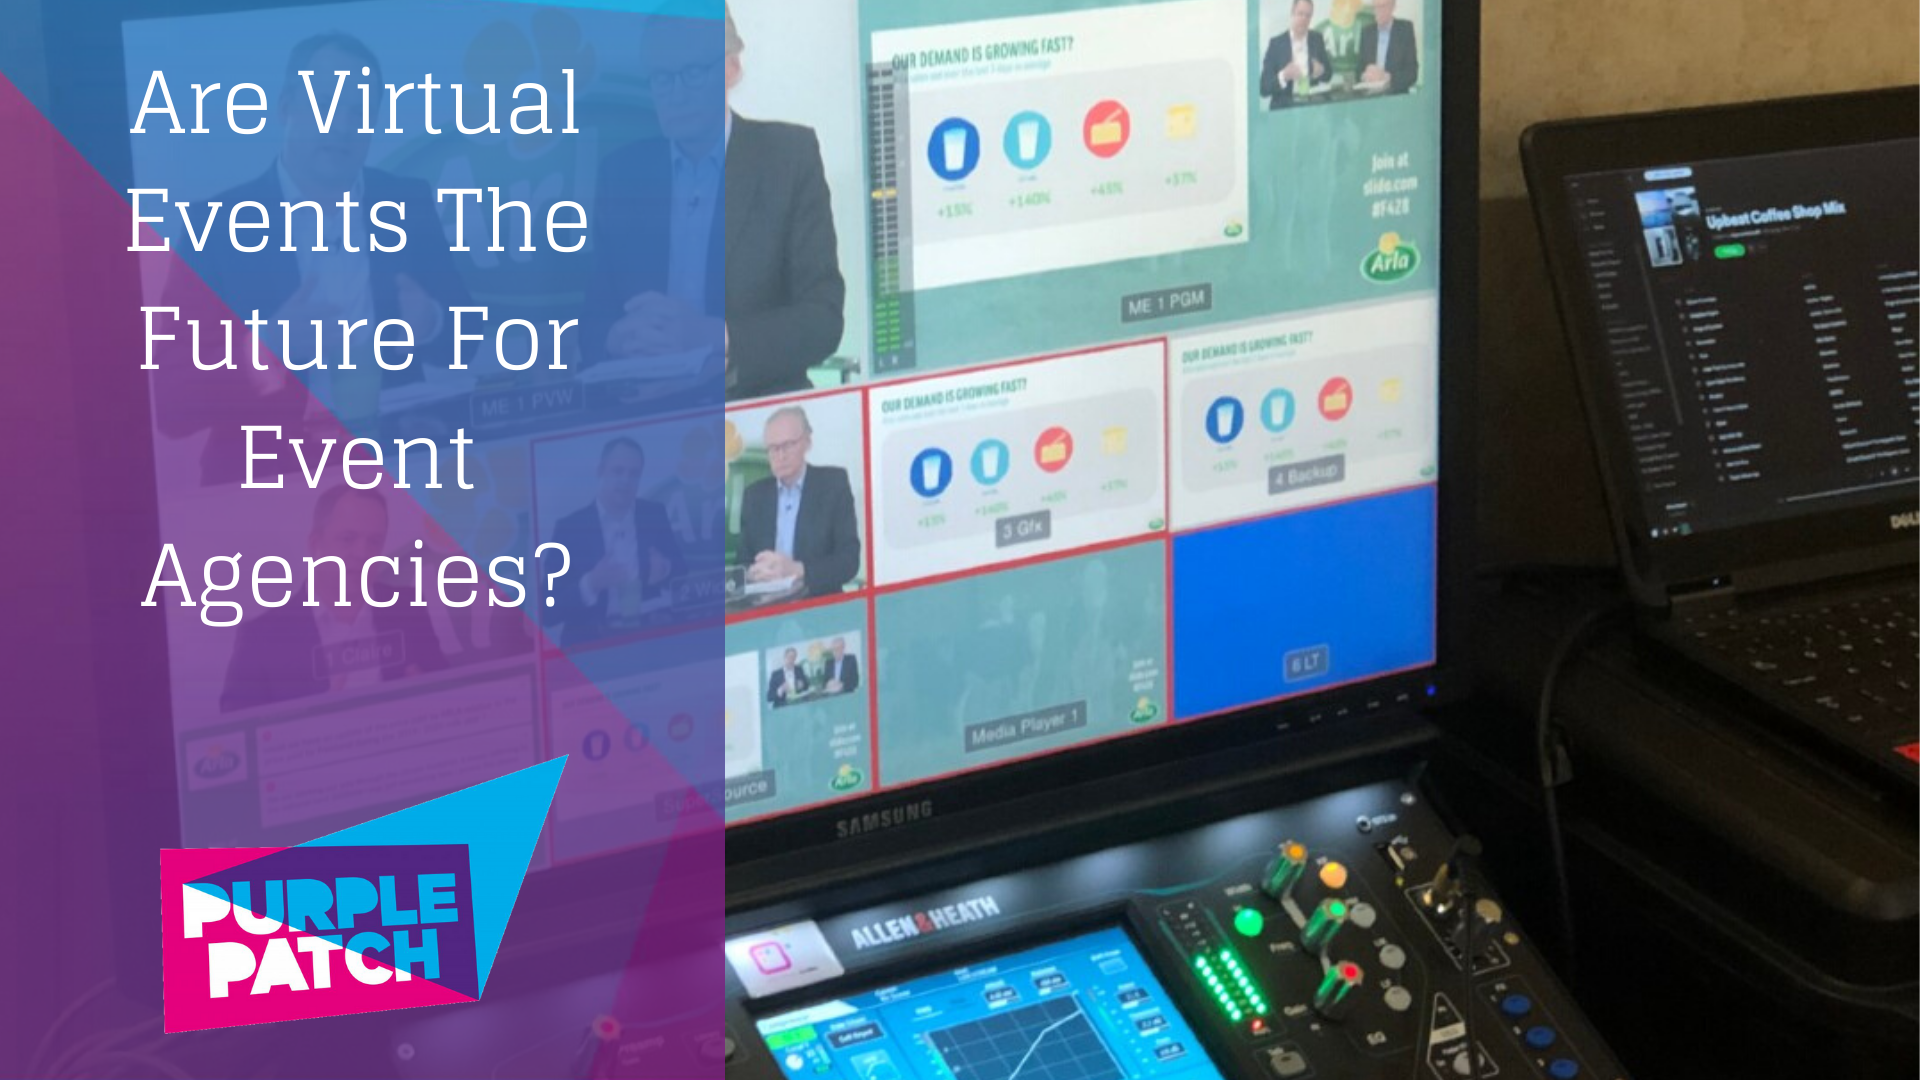 Are virtual events the future for event agencies?